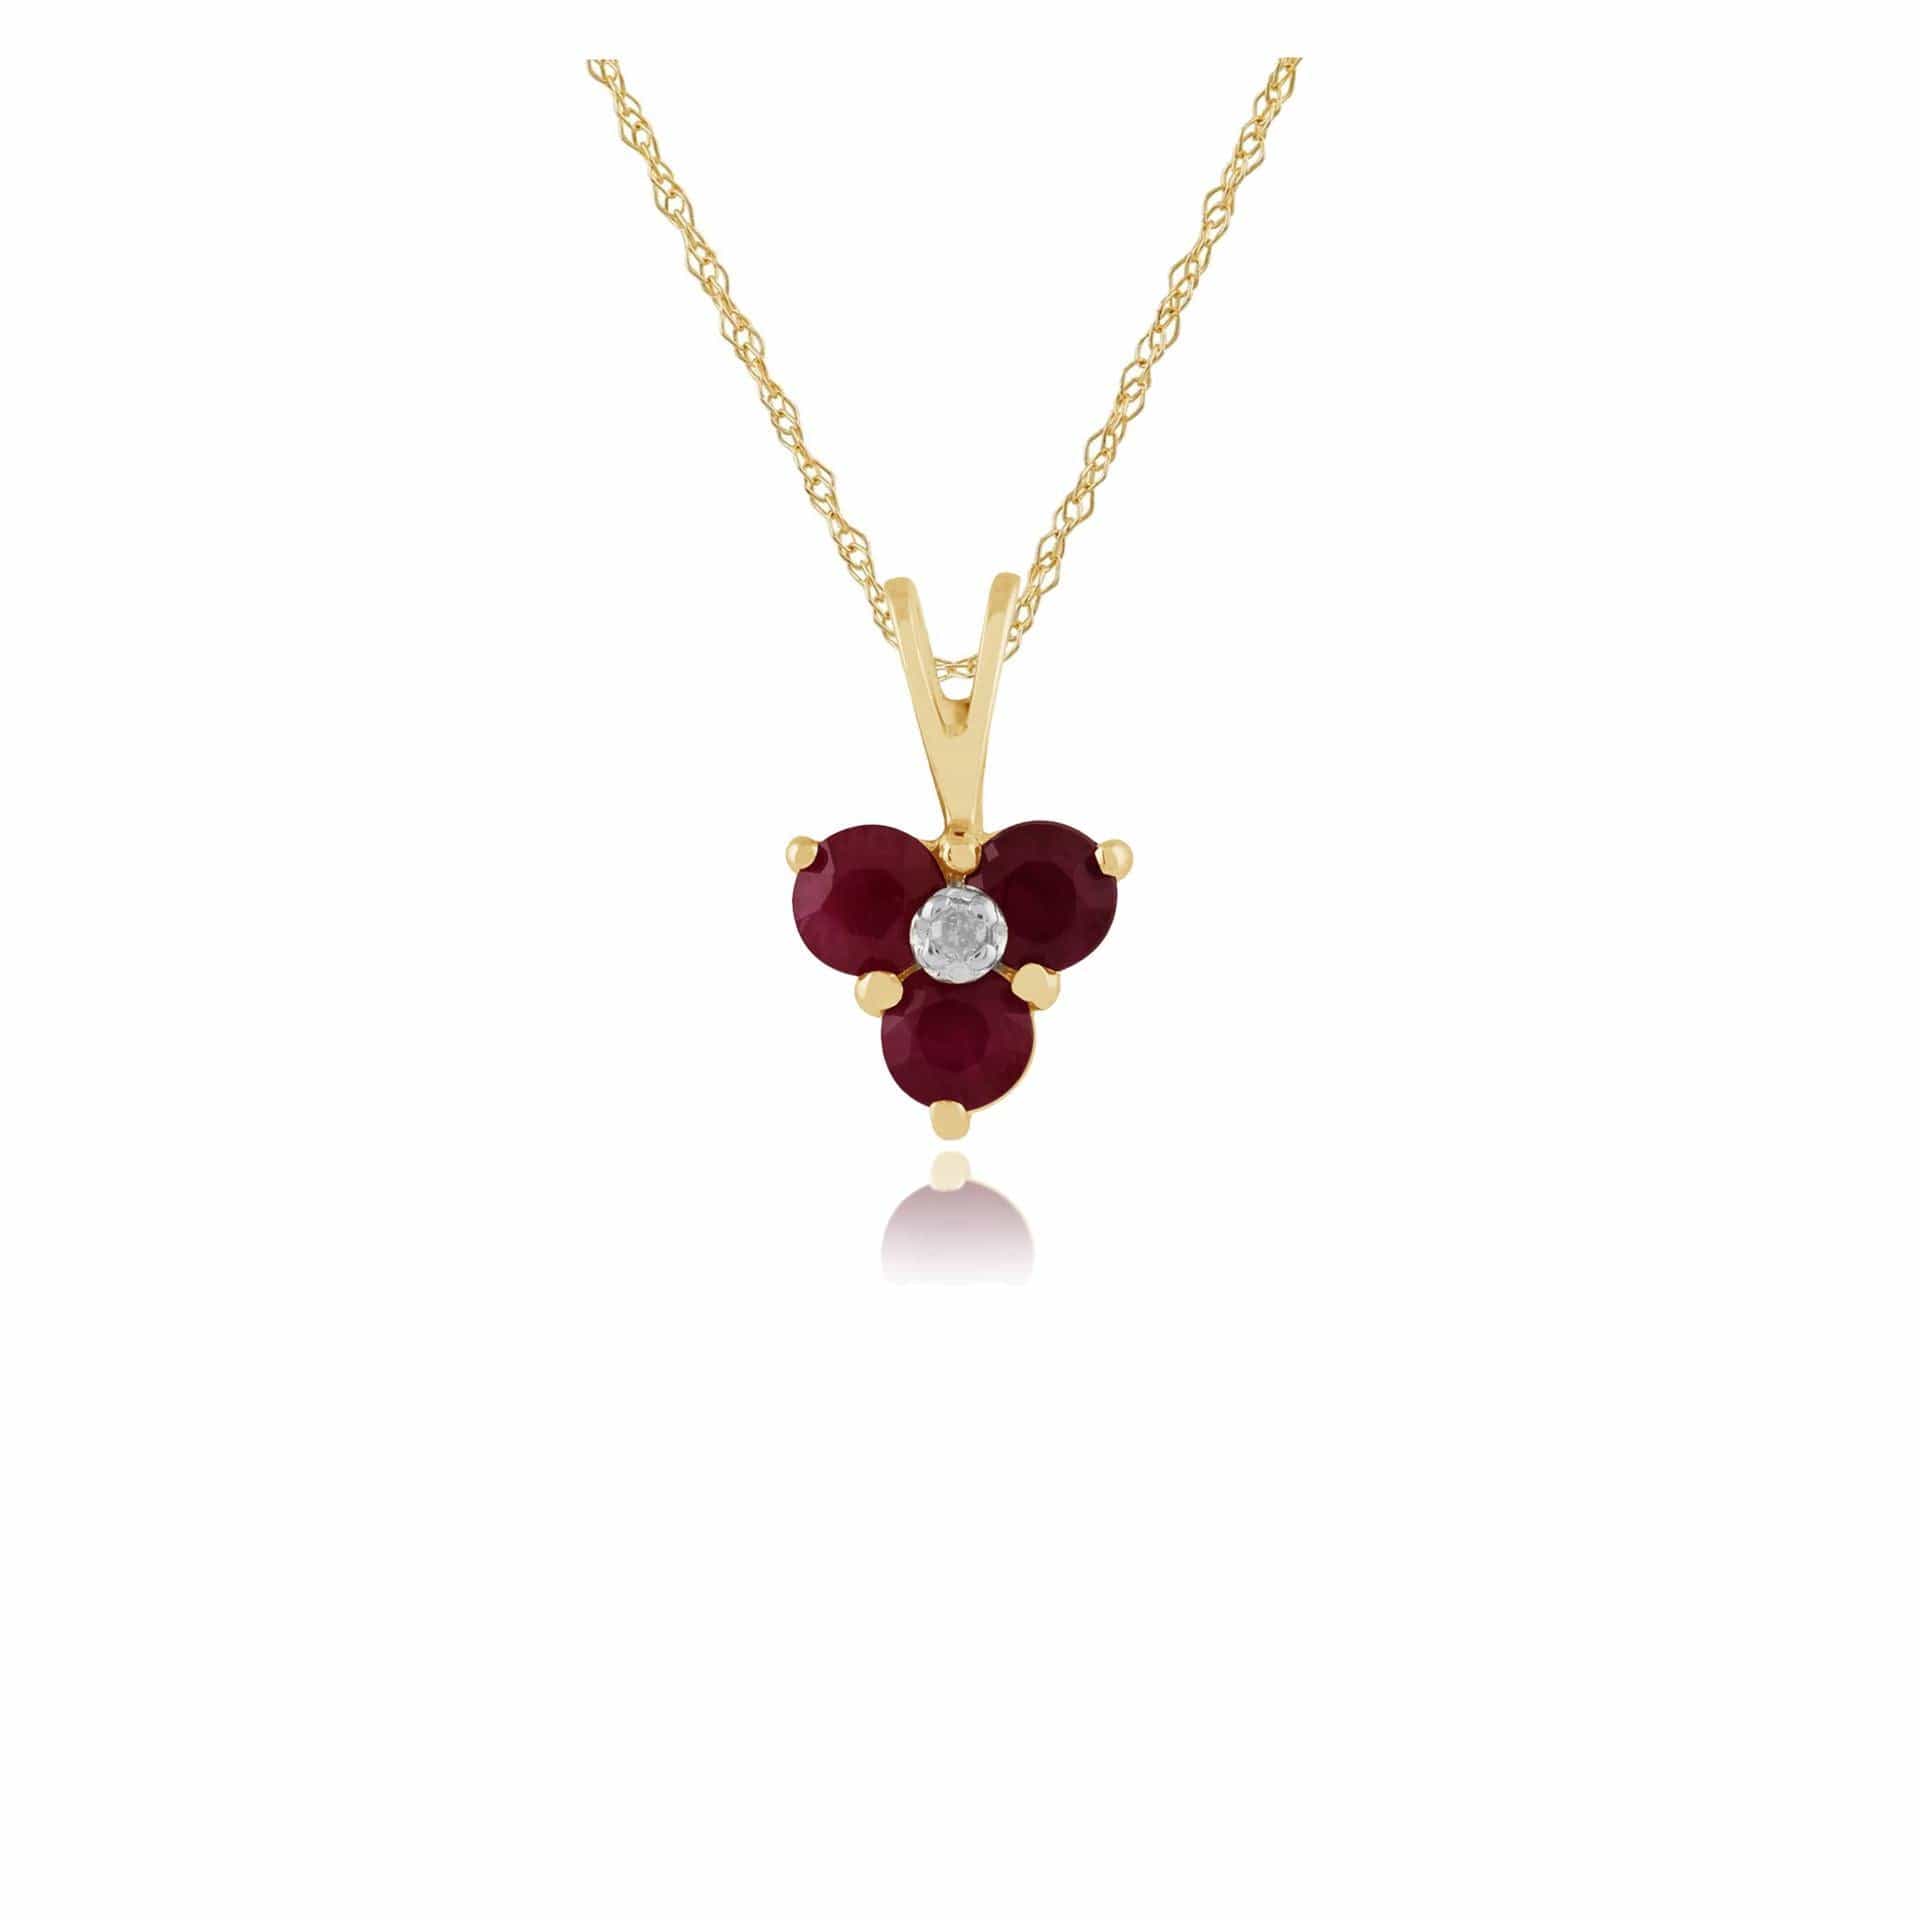 Photos - Pendant / Choker Necklace Classic Round Ruby & Diamond Cluster Pendant in 9ct Yellow Gold